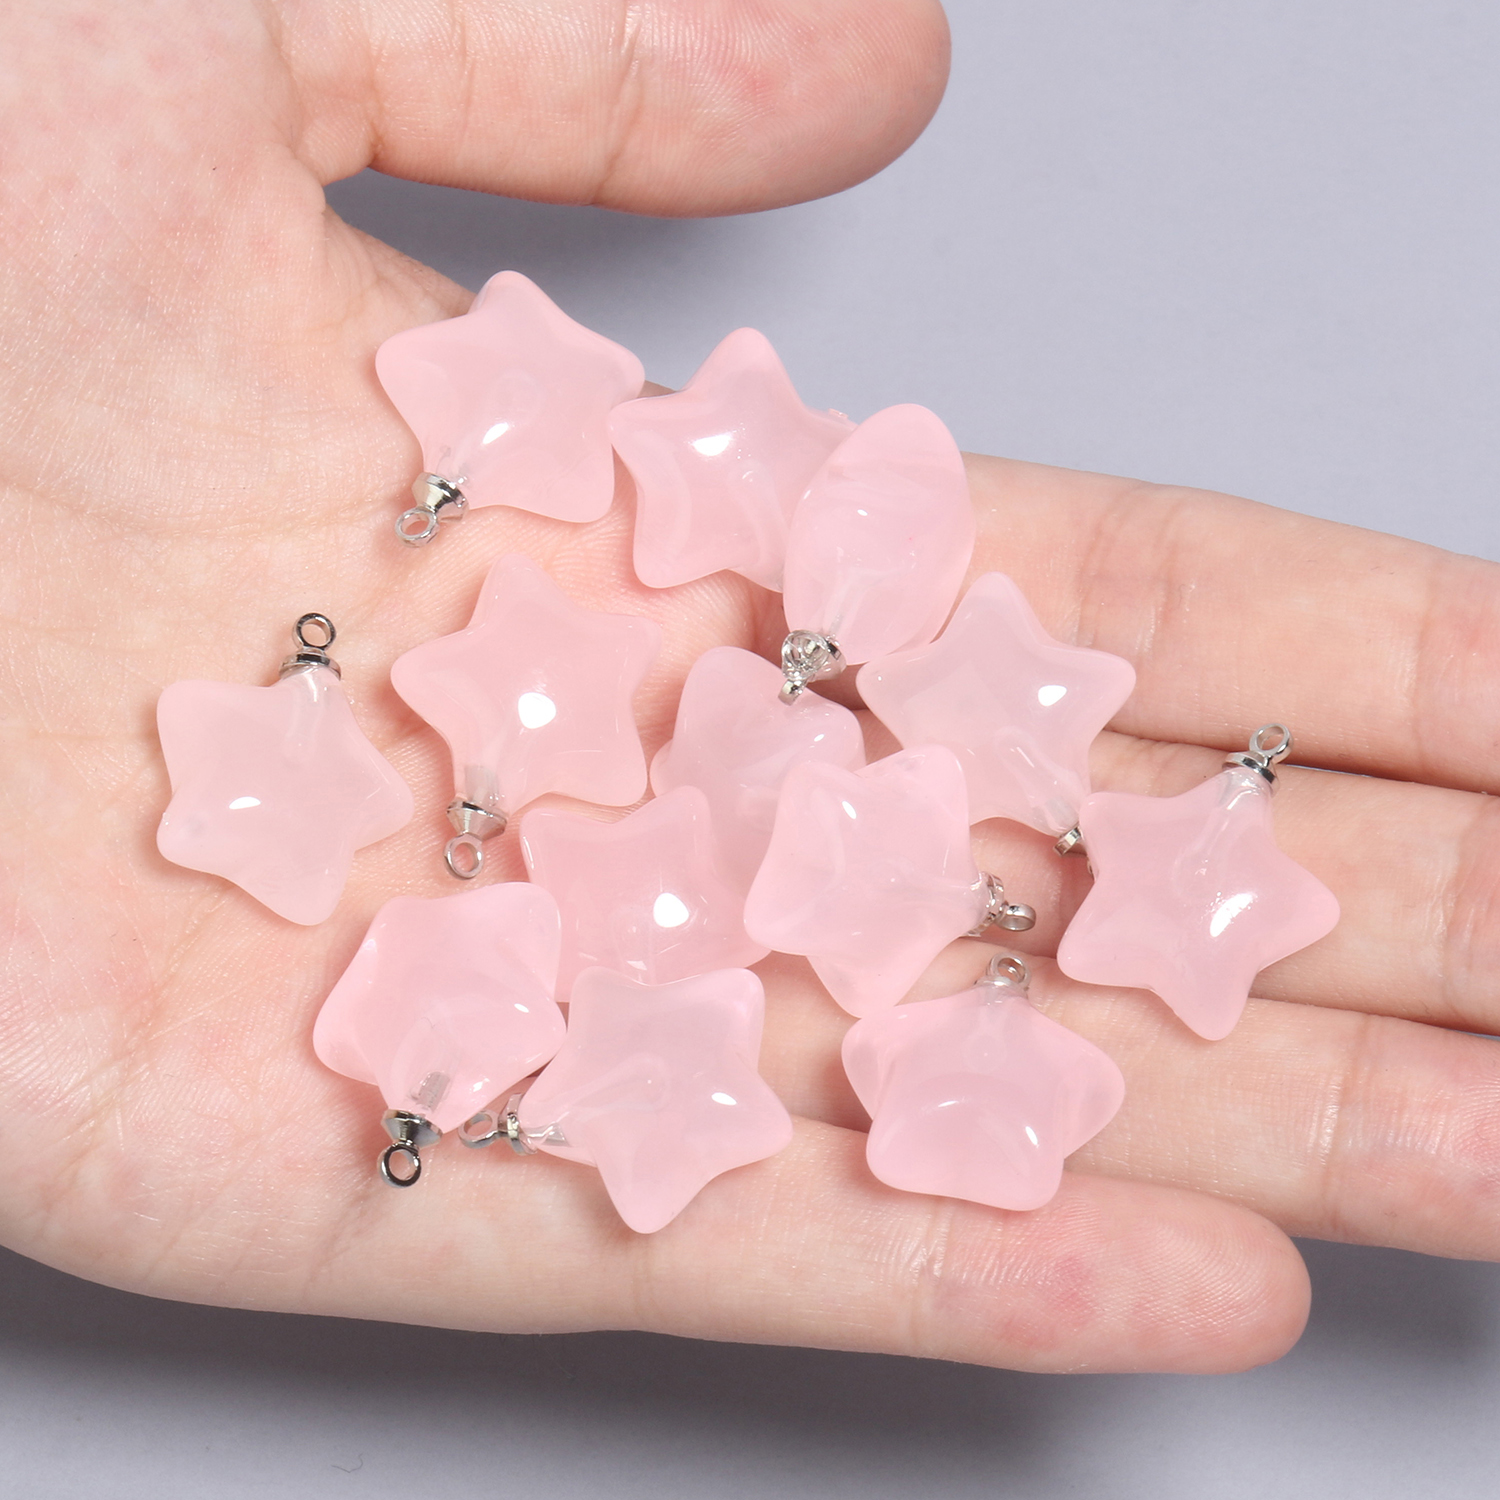 10pcs Lovely Candy Color Star Acrylic Charms Pendant Earring Handmade for  Diy Jewelry Making Charms for Necklace Bracelet